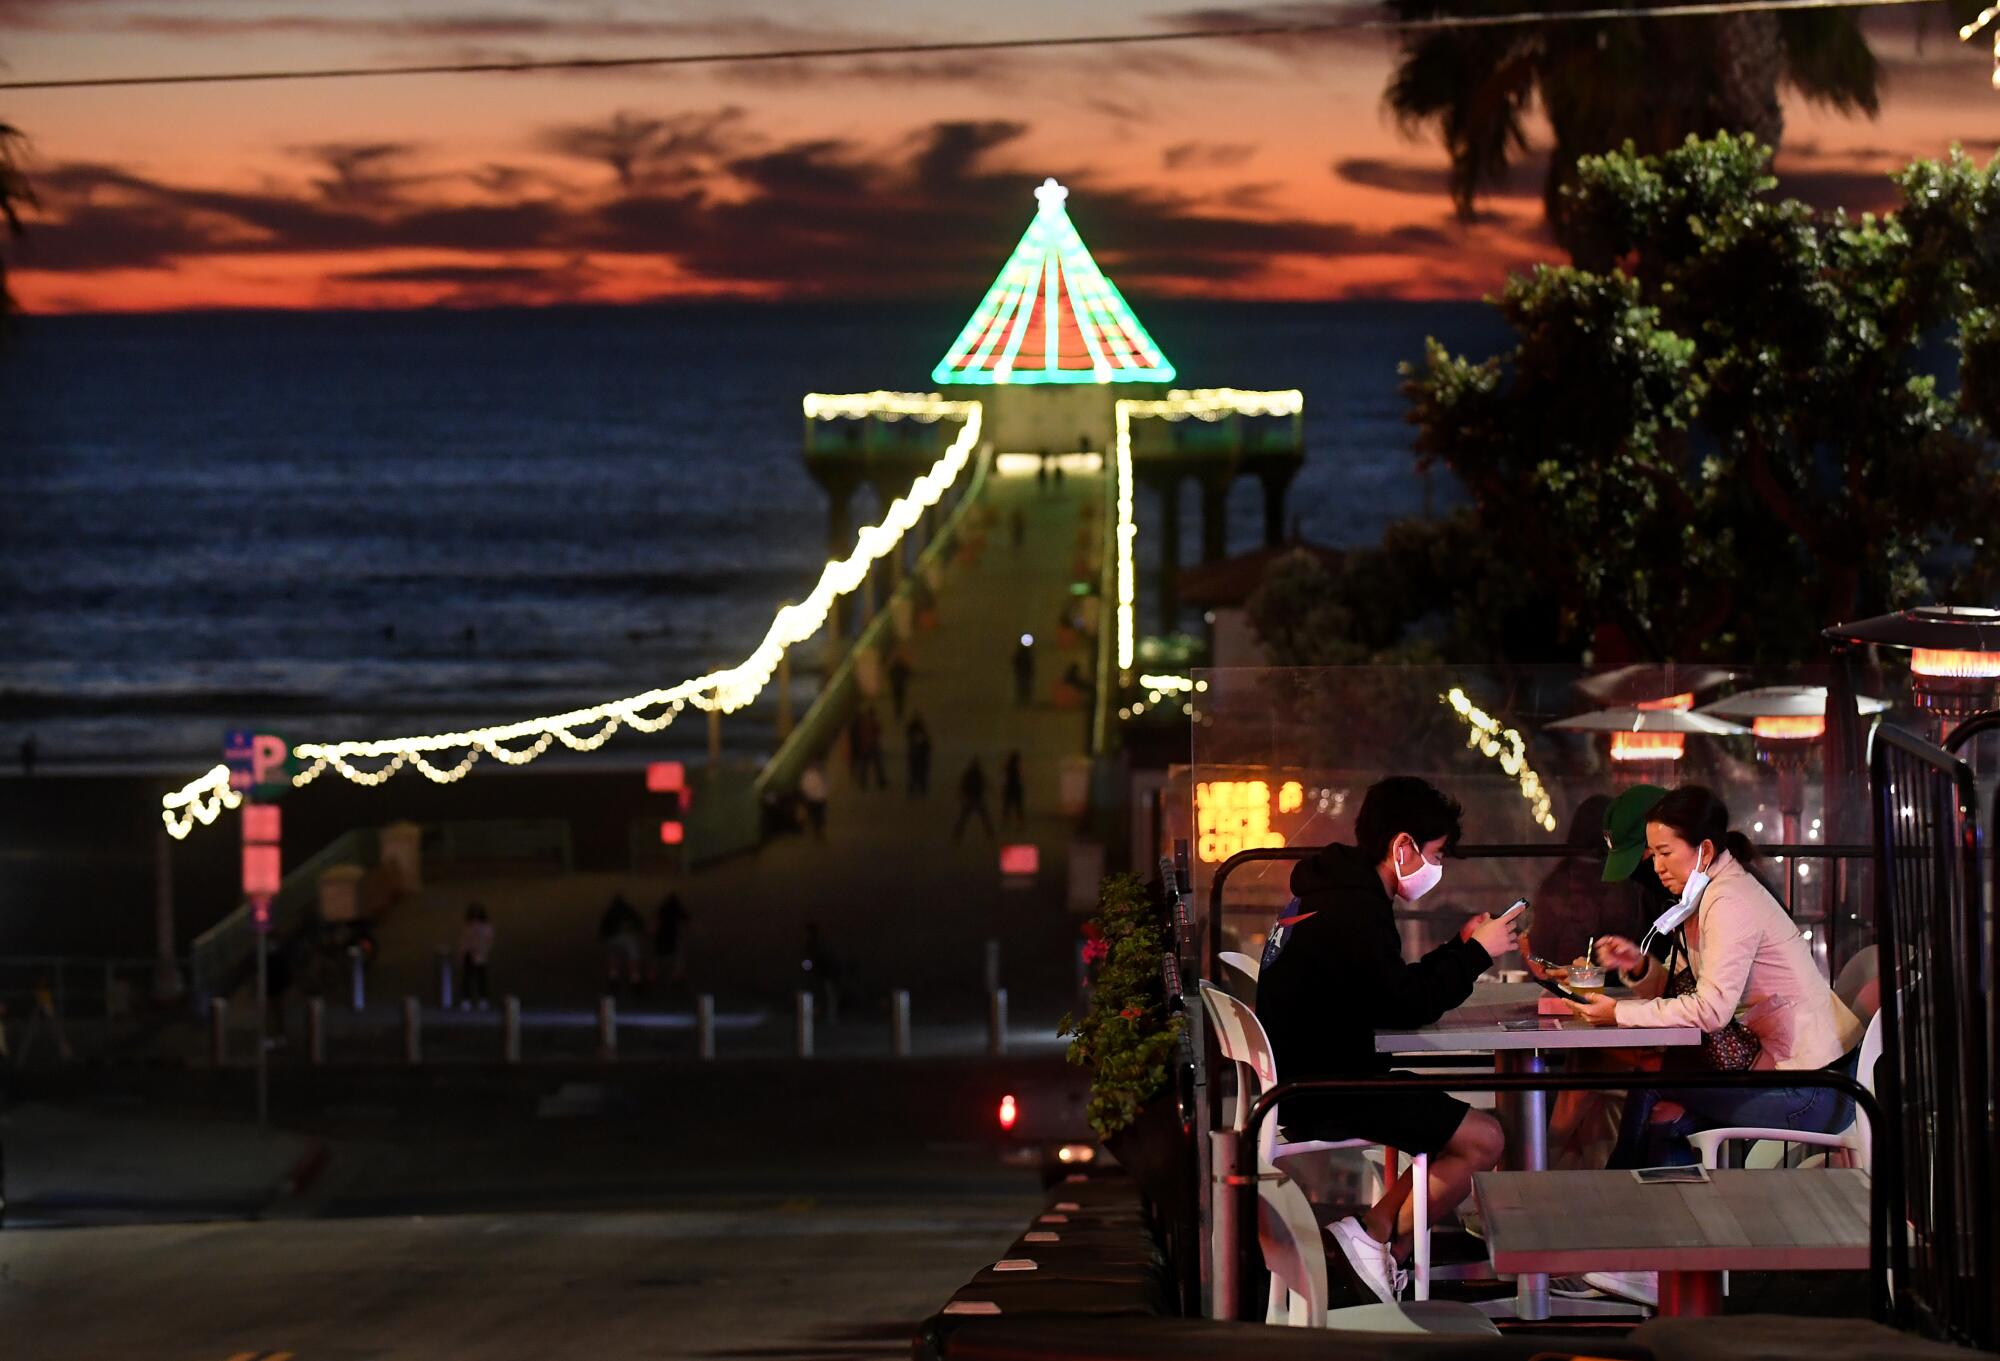 People dine in the early evening next to a pier decorated with holiday lights.